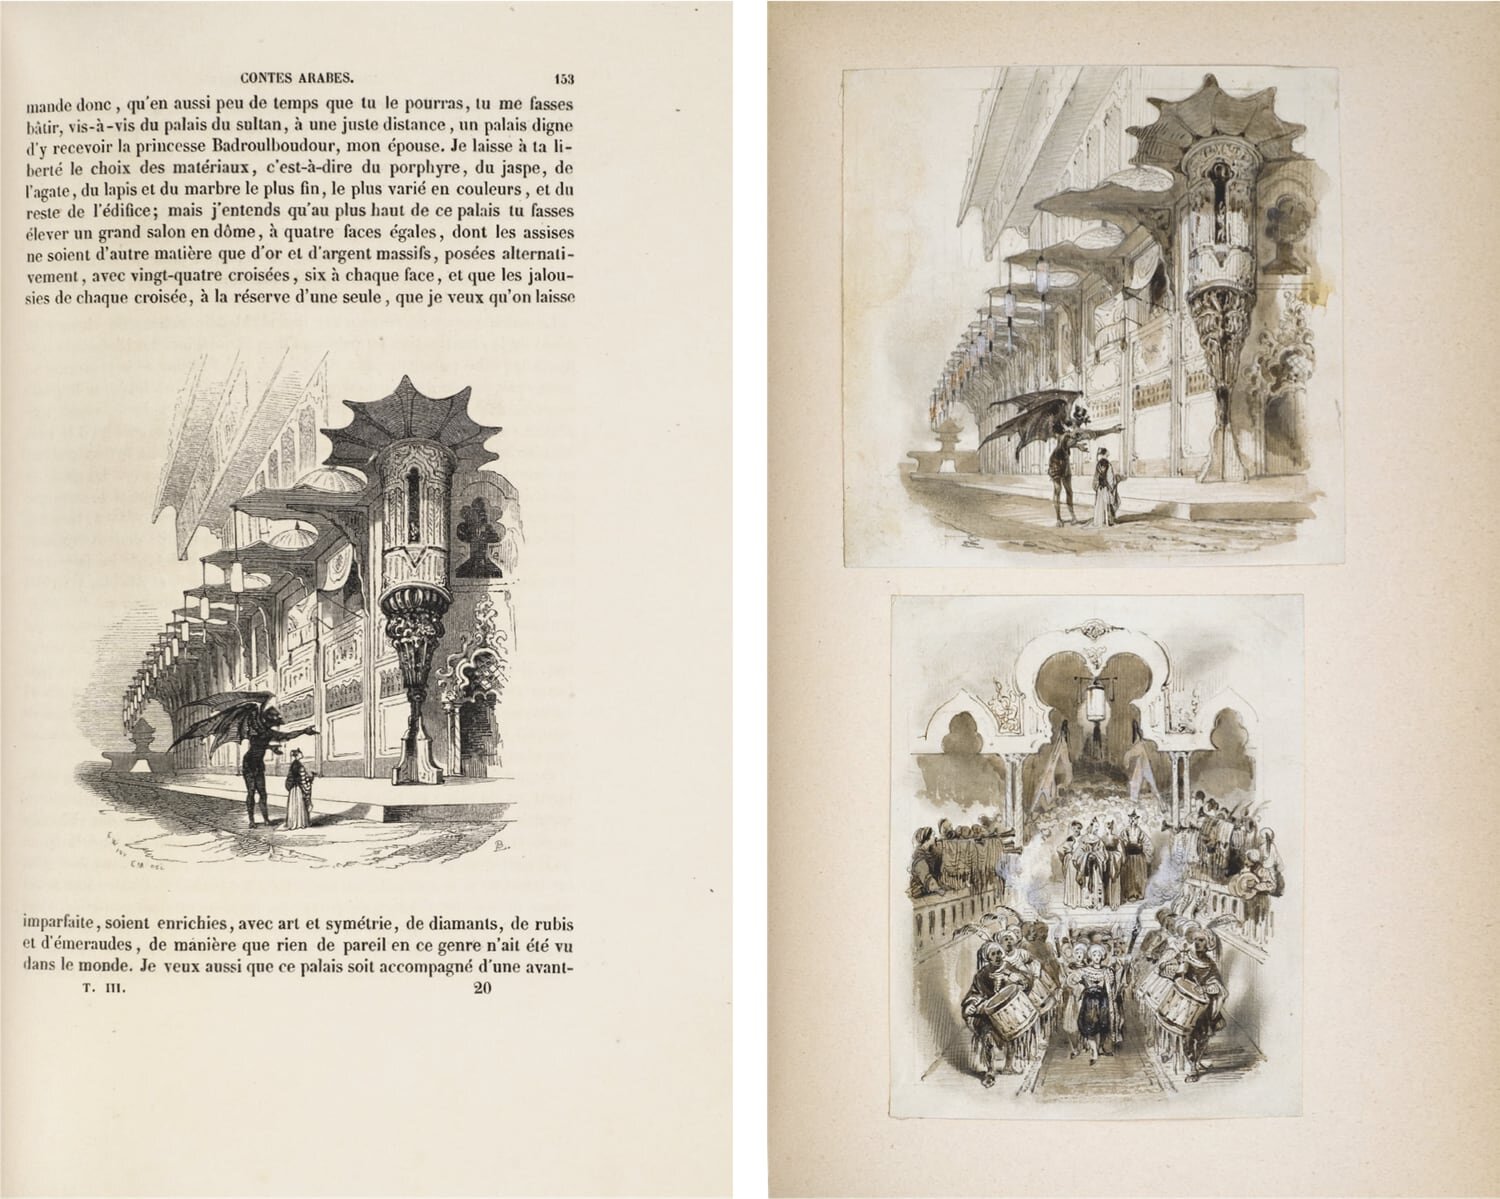  Original drawings, mostly by Édouard Wattier, for the 1840 edition of Arabian Nights by Ernest Bourdin [no. 447] 